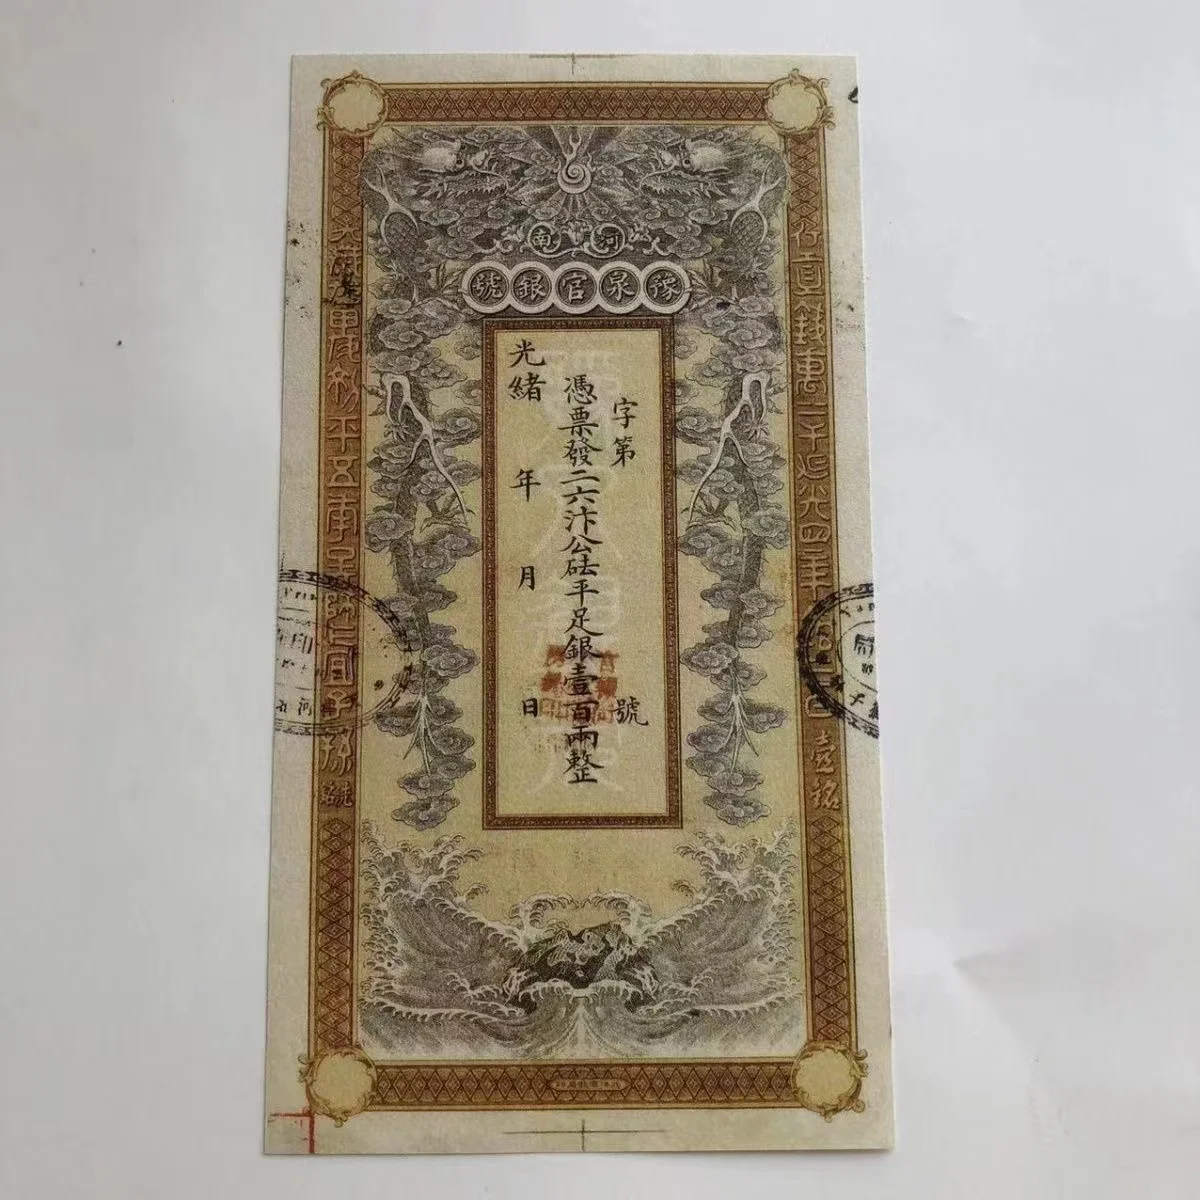 

Old Chinese Qing Dynasty Note, Guangxu Period Henan Province Yuquan Paper Ticket for Collection, 100Liang Notes Coupon Antique